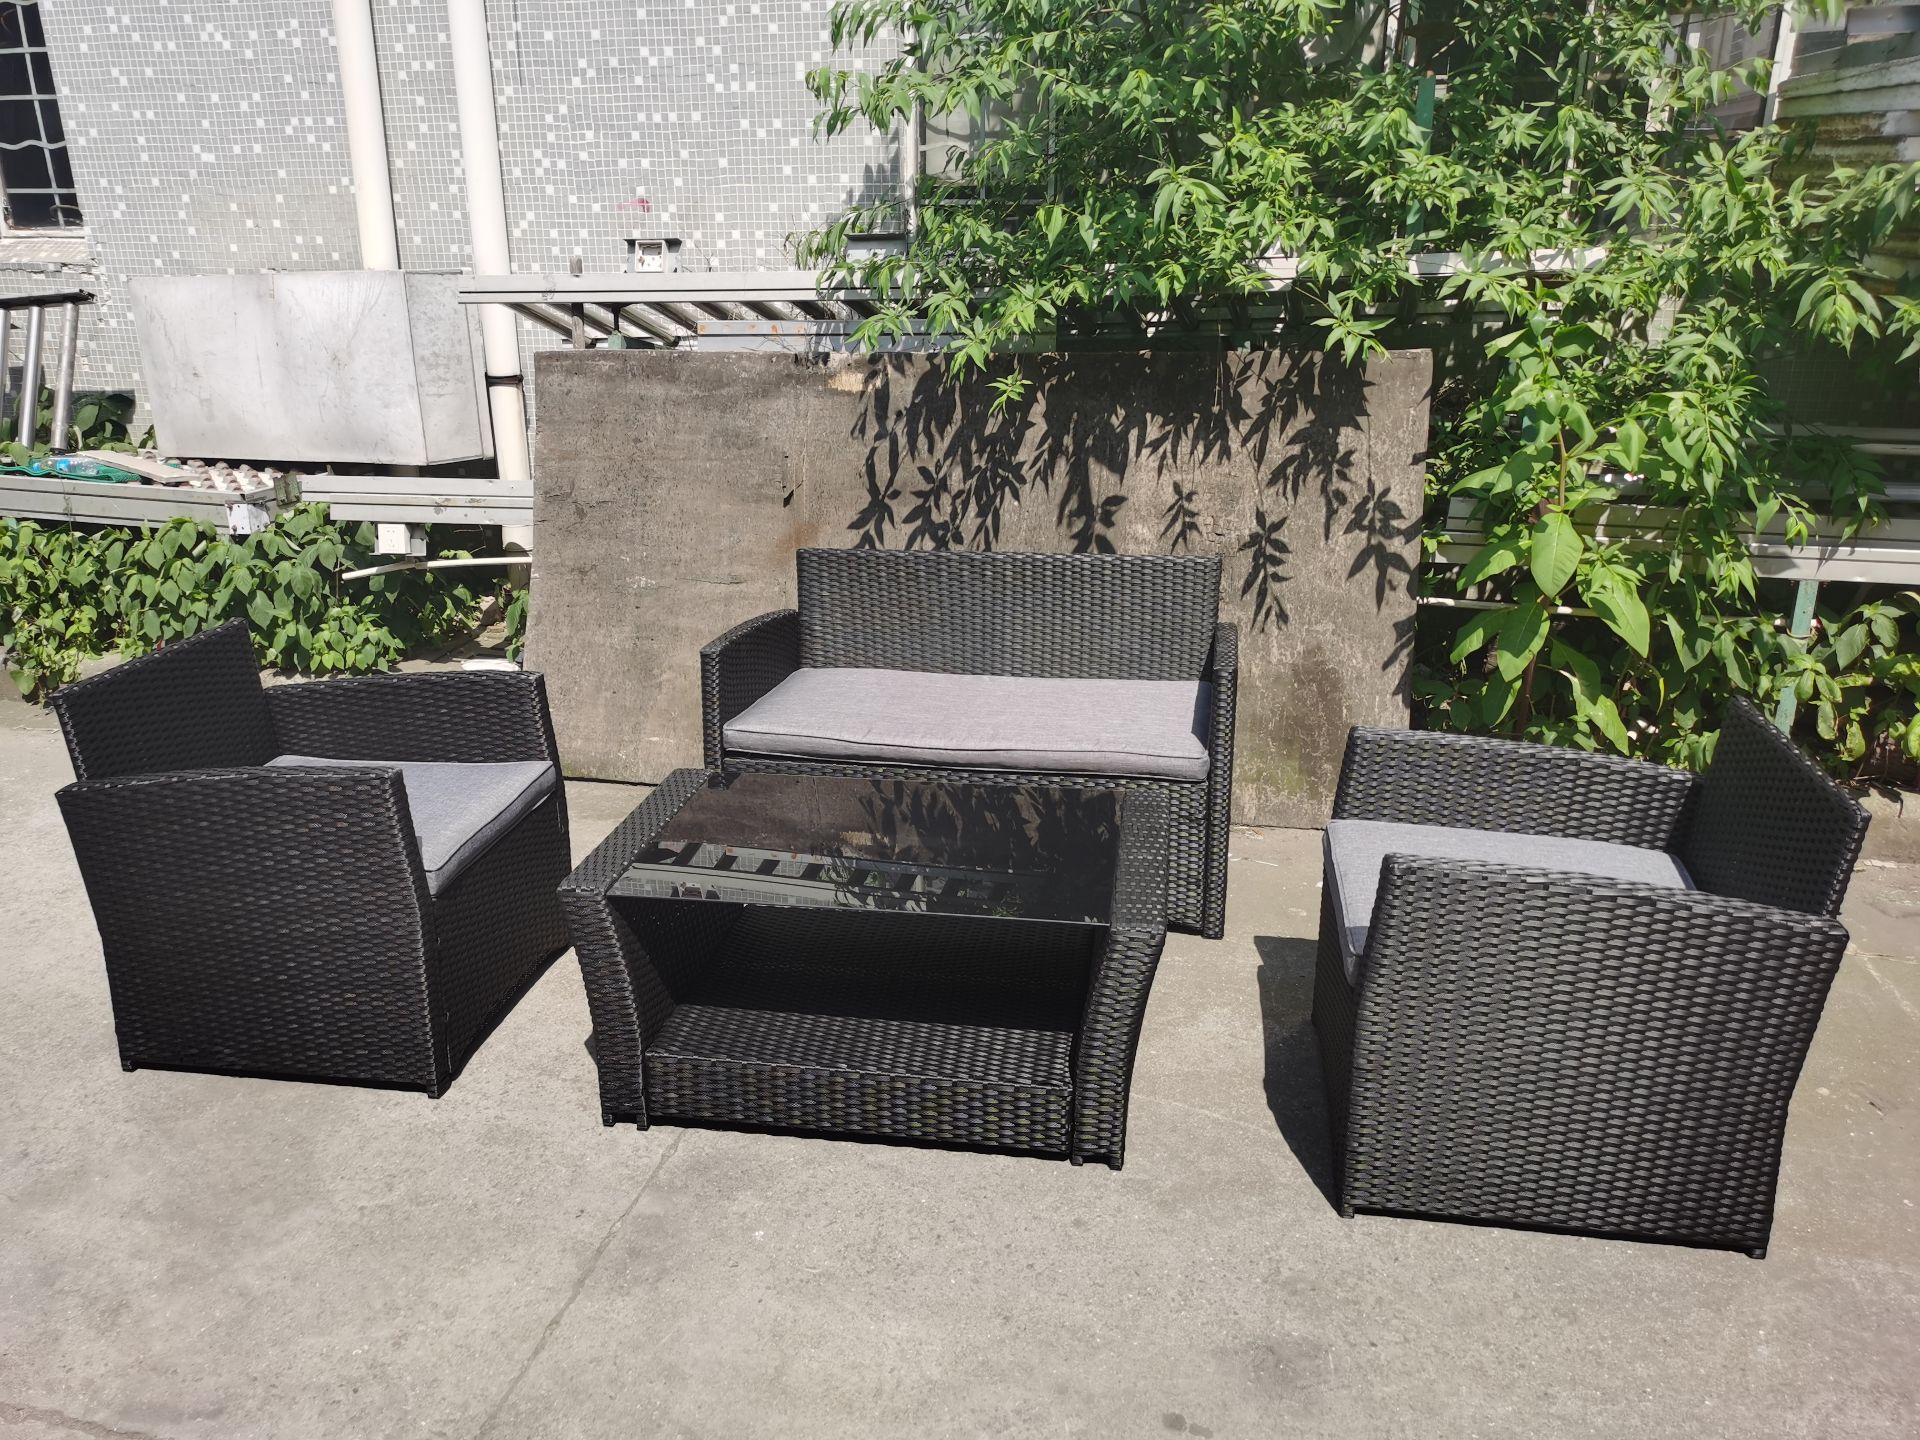 * 1 xBrand New - In Cardboard Boxes - Garden Rattan Furntiure Set. Black Wick with Grey Cushions. - Image 2 of 3